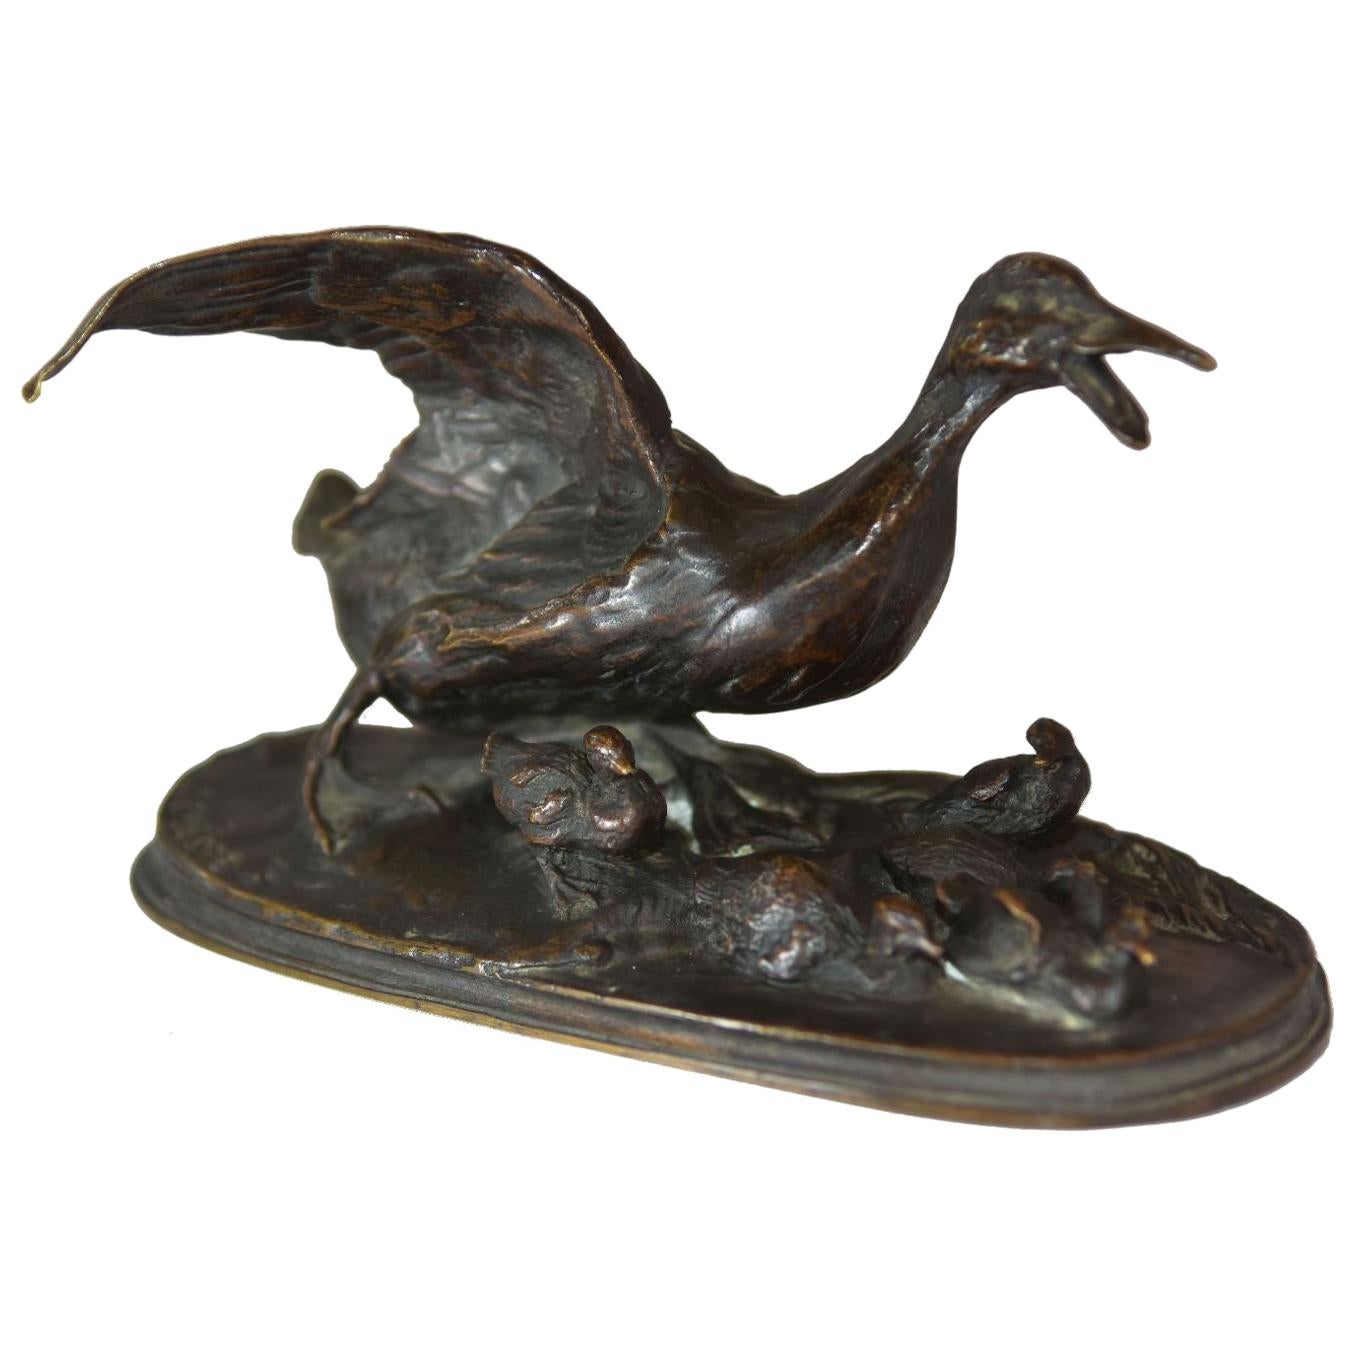 19th Century Cane with Its 6 Animal Bronze Ducklings by P.J Mêne